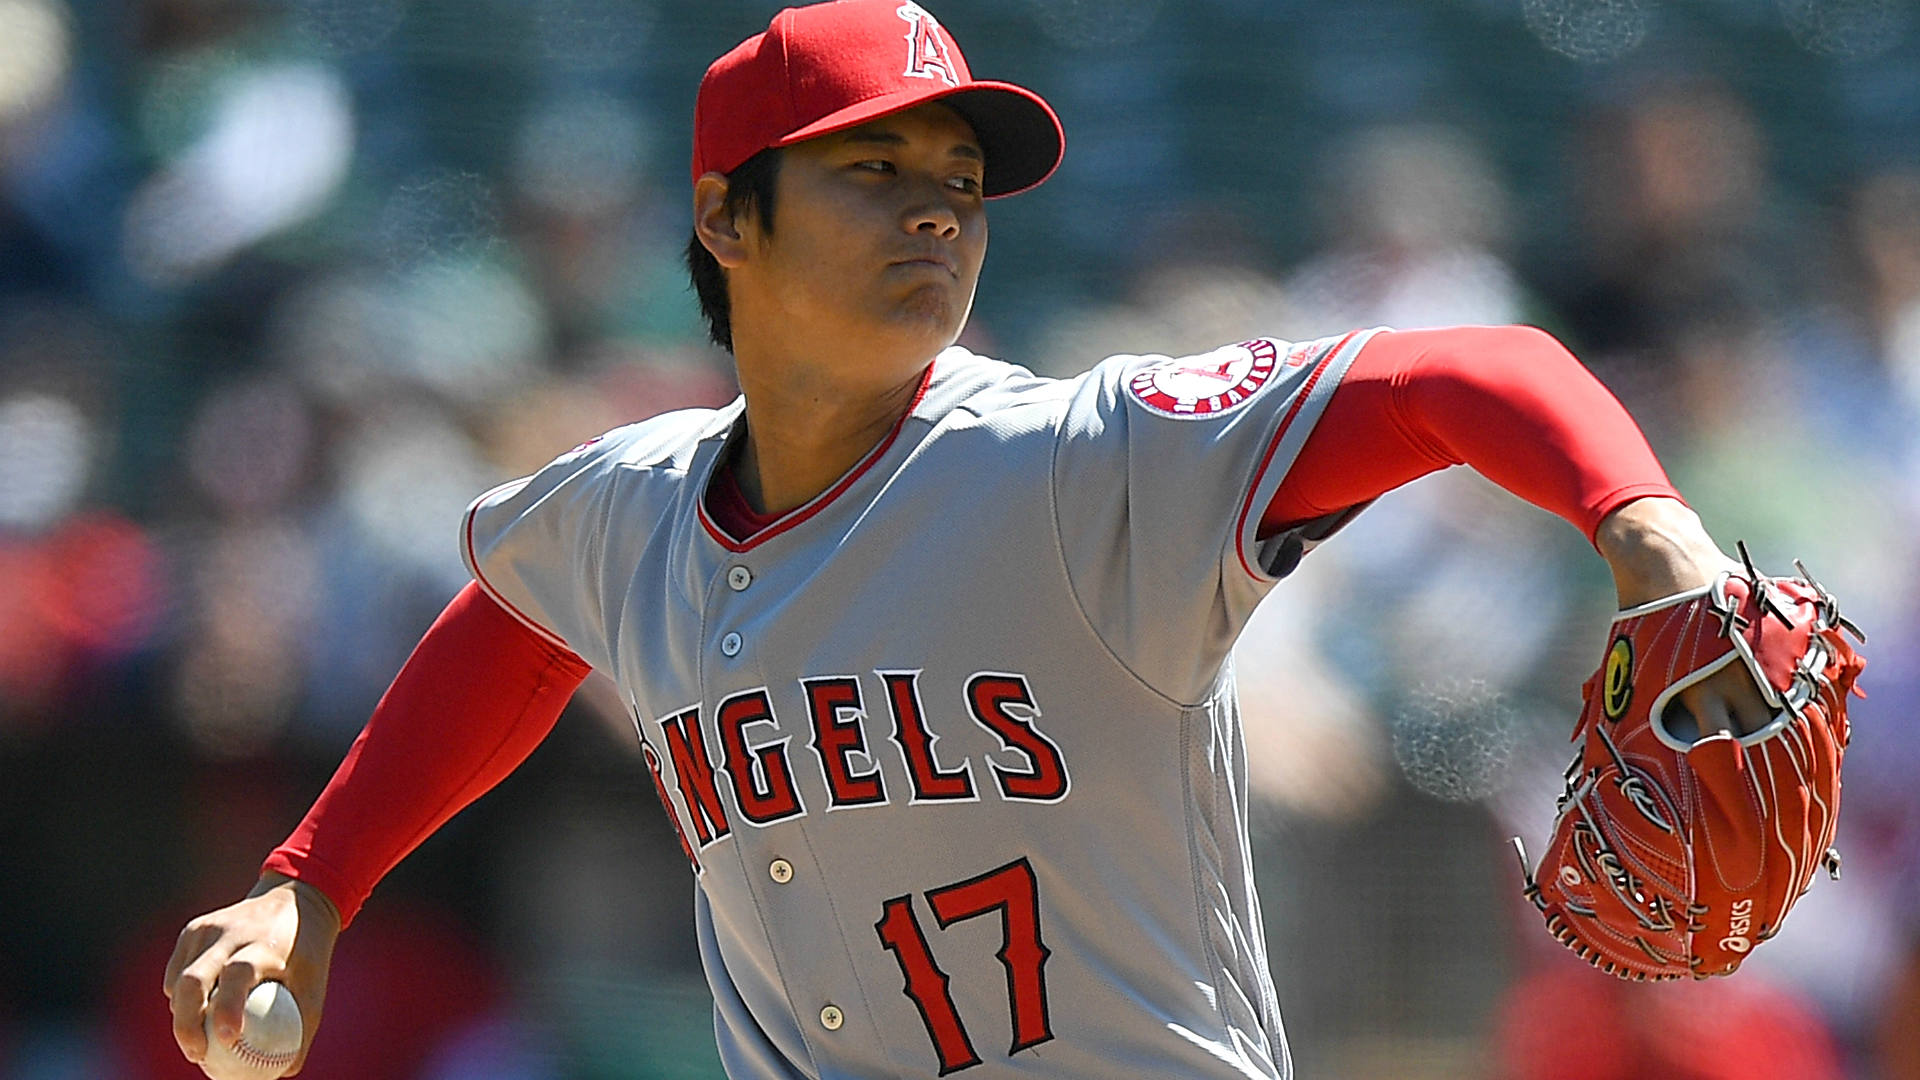 Shohei Ohtani's strong pitching debut draws praise 'I think you saw